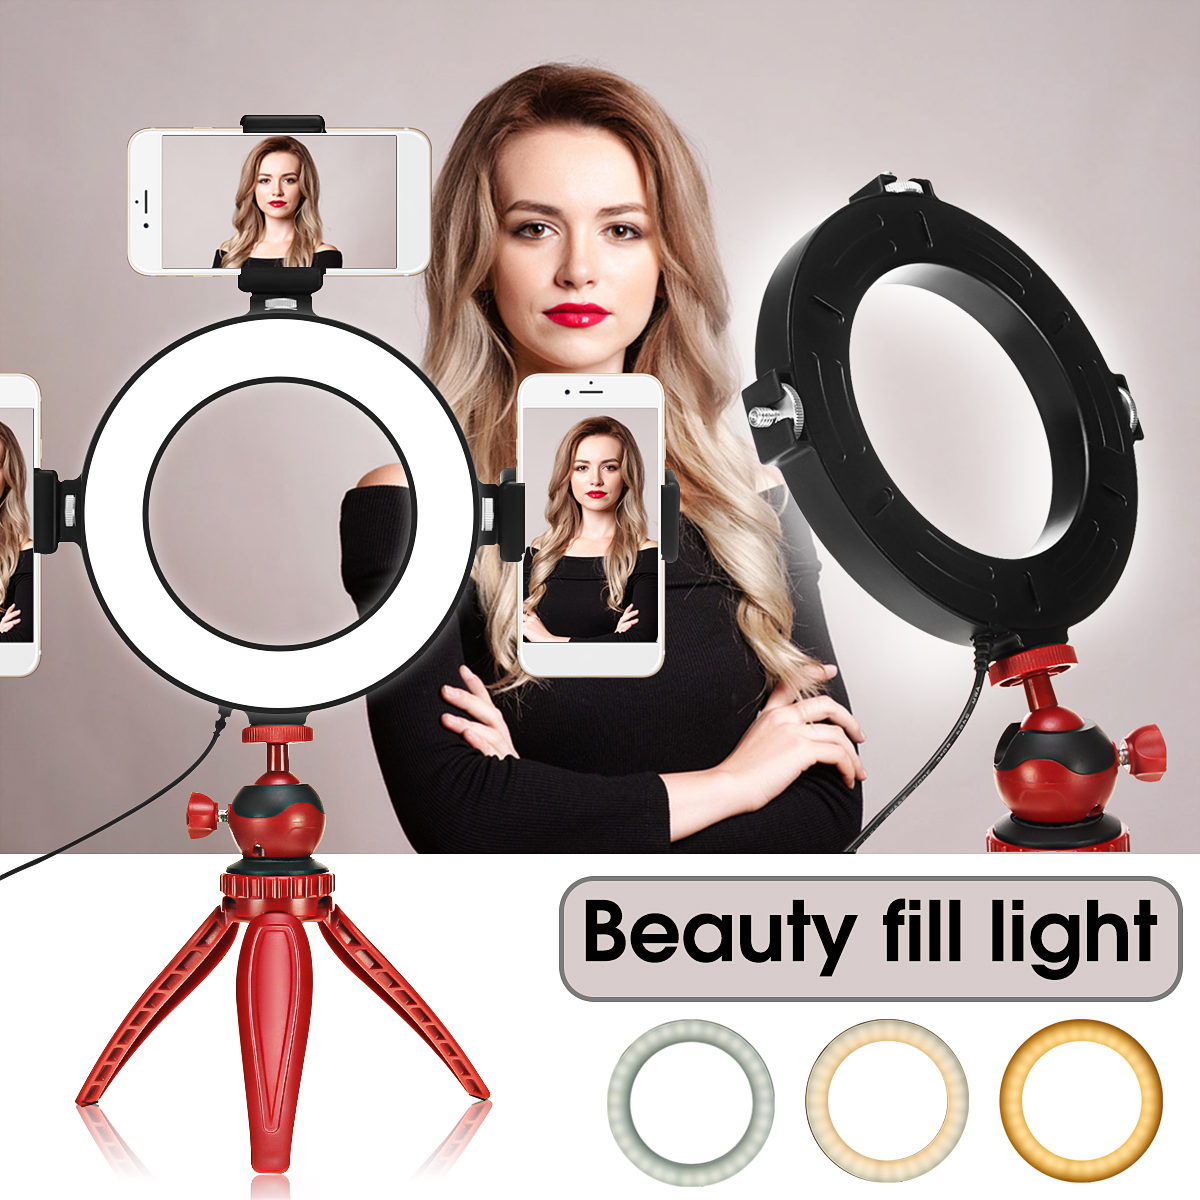 LED Ring Light Studio Photo Video Dimmable Lamp